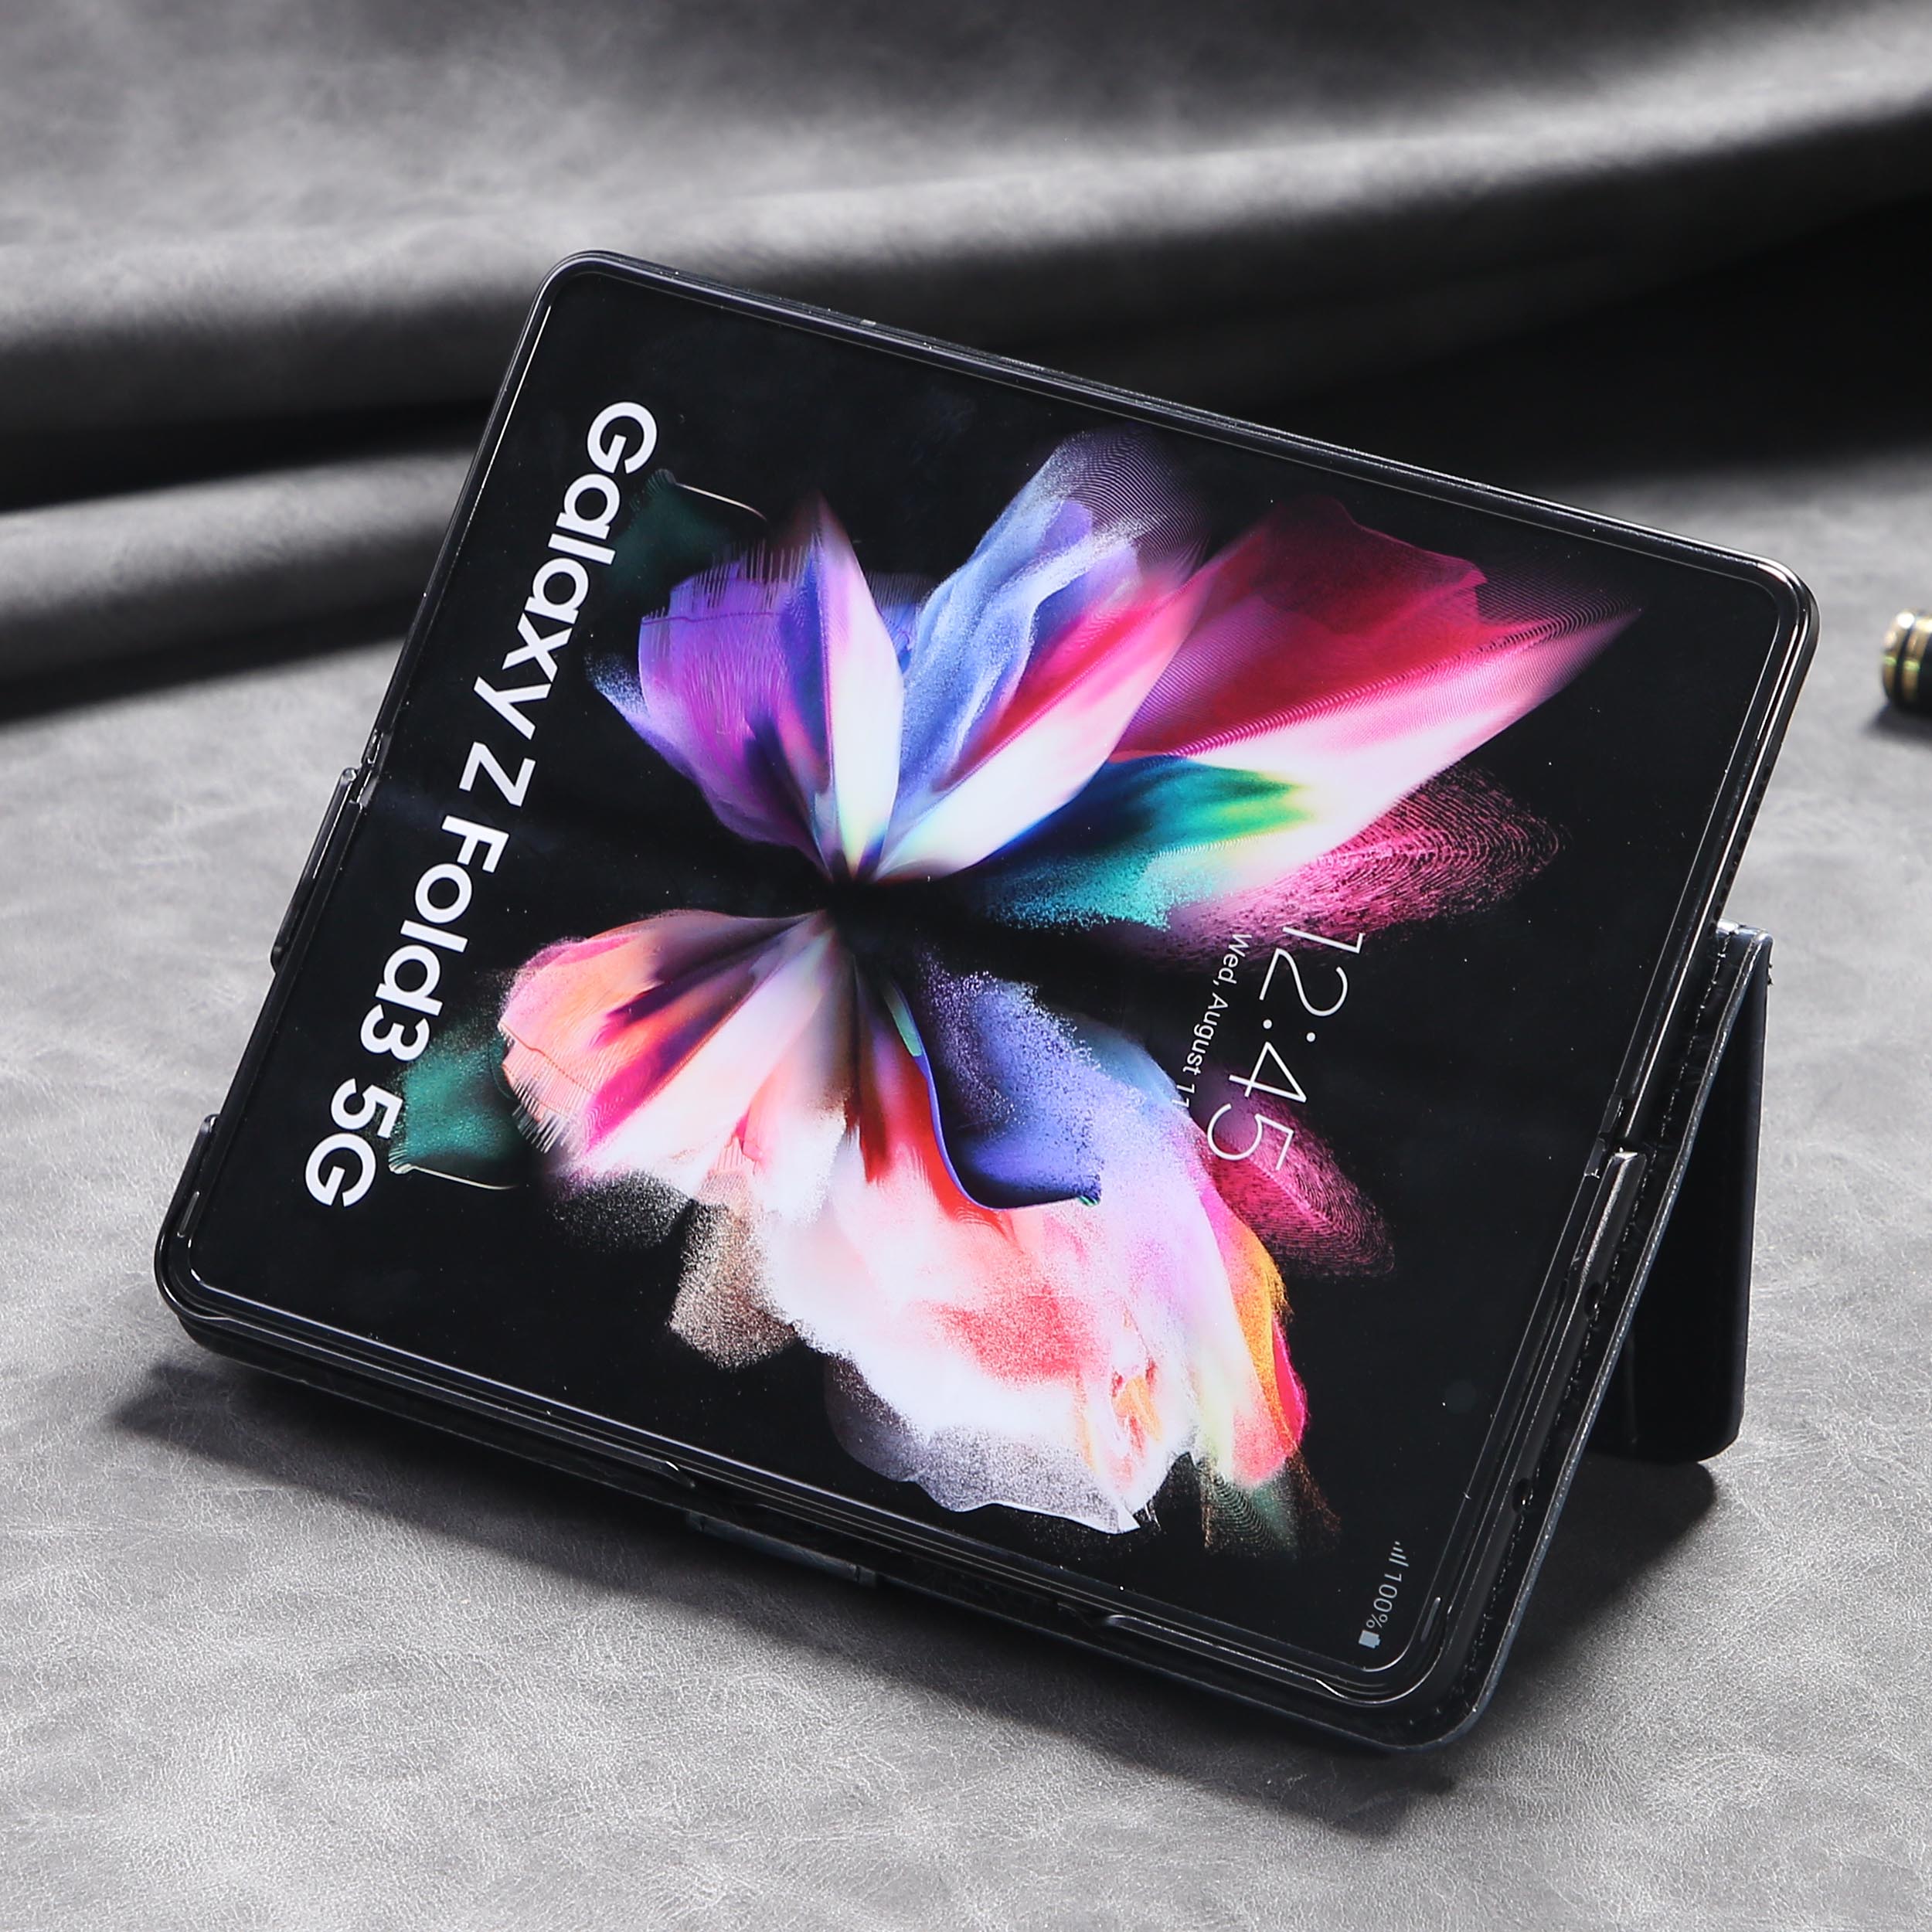 brand new samsung galaxy z fold3 phone case foldable phone holster protective coversdehb